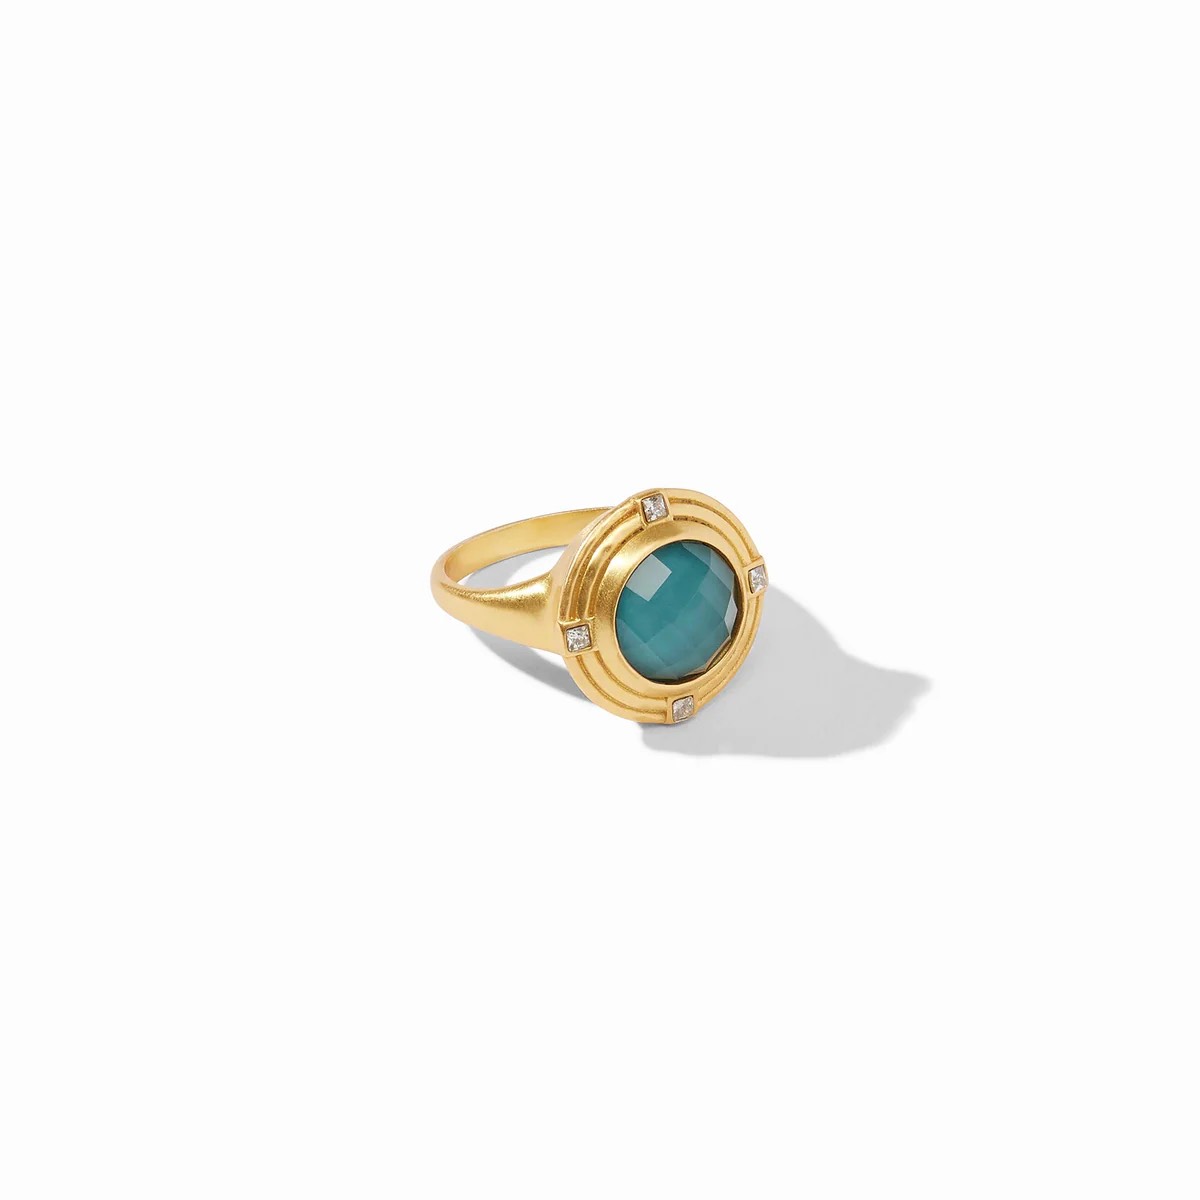 Astor Ring - Iridescent Peacock Blue, Size 8